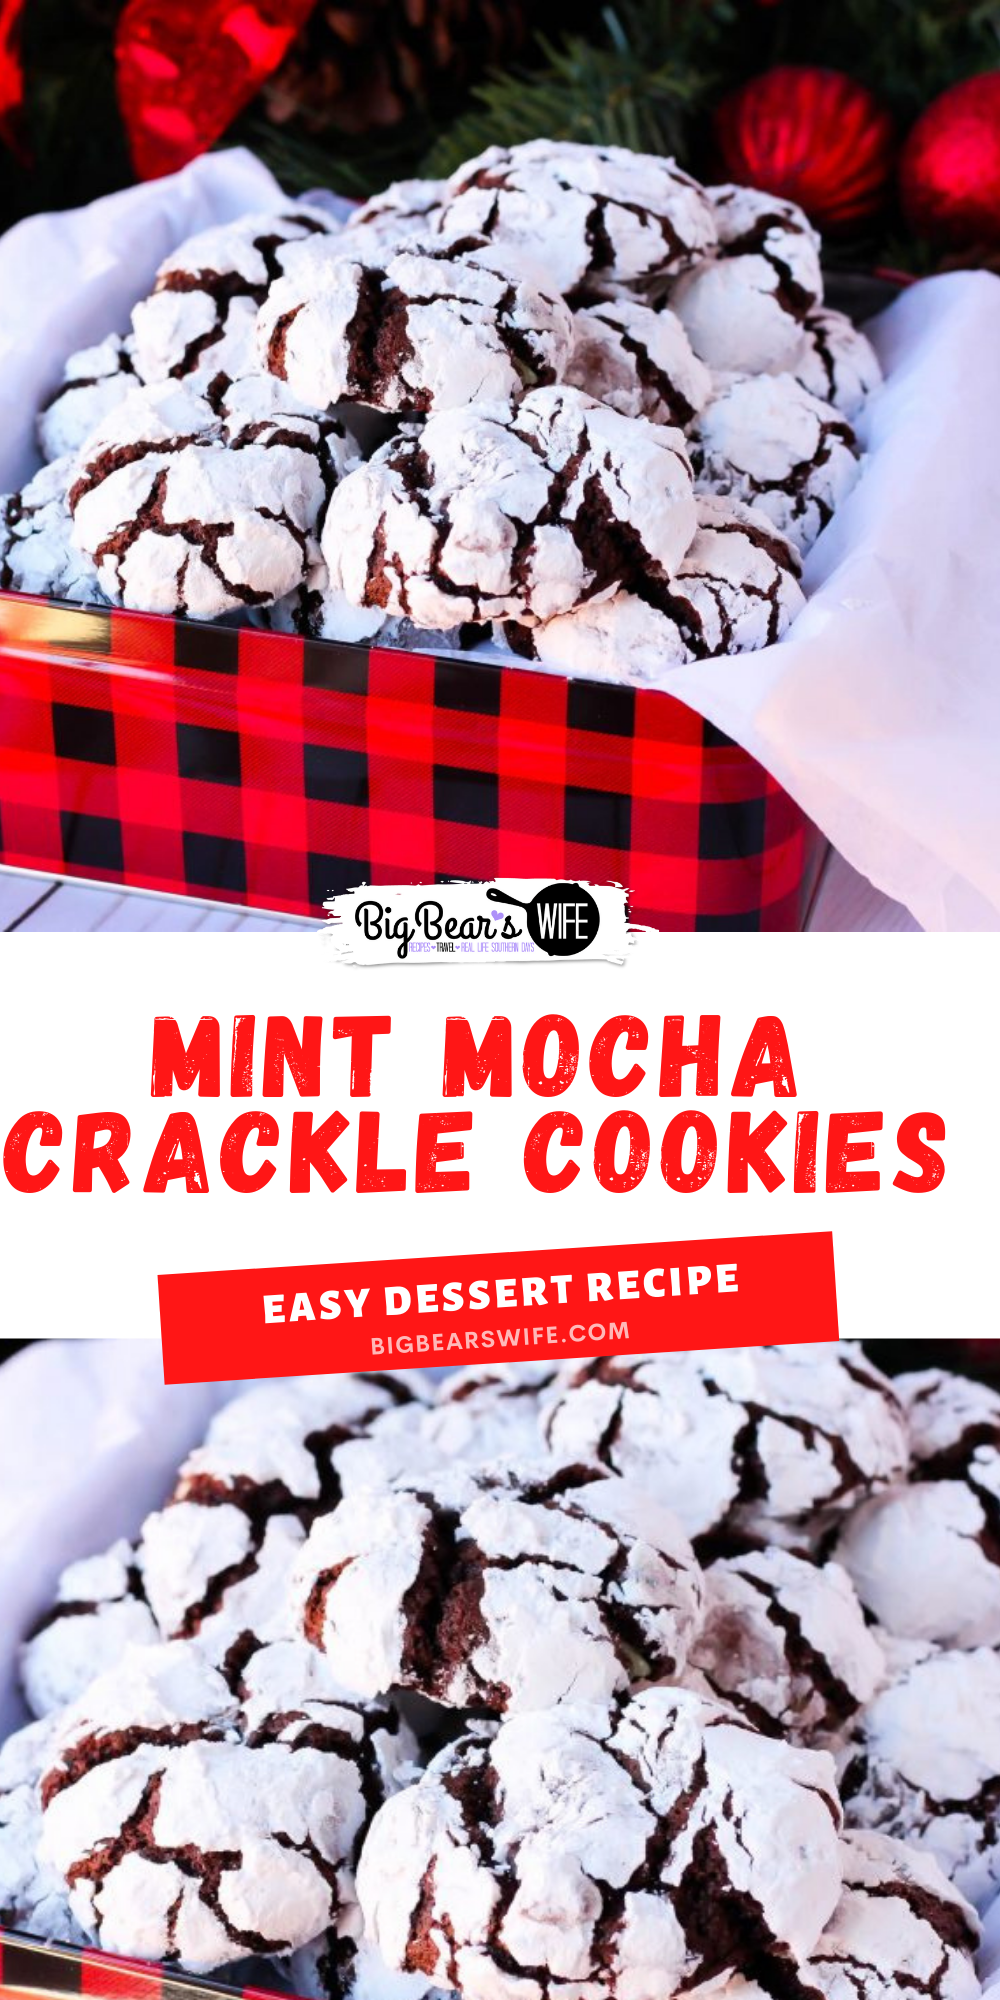 Chocolate Crackle cookies with a minty twist for the holidays! These Mint Mocha Crackle Cookies would be perfect for Santa!  via @bigbearswife